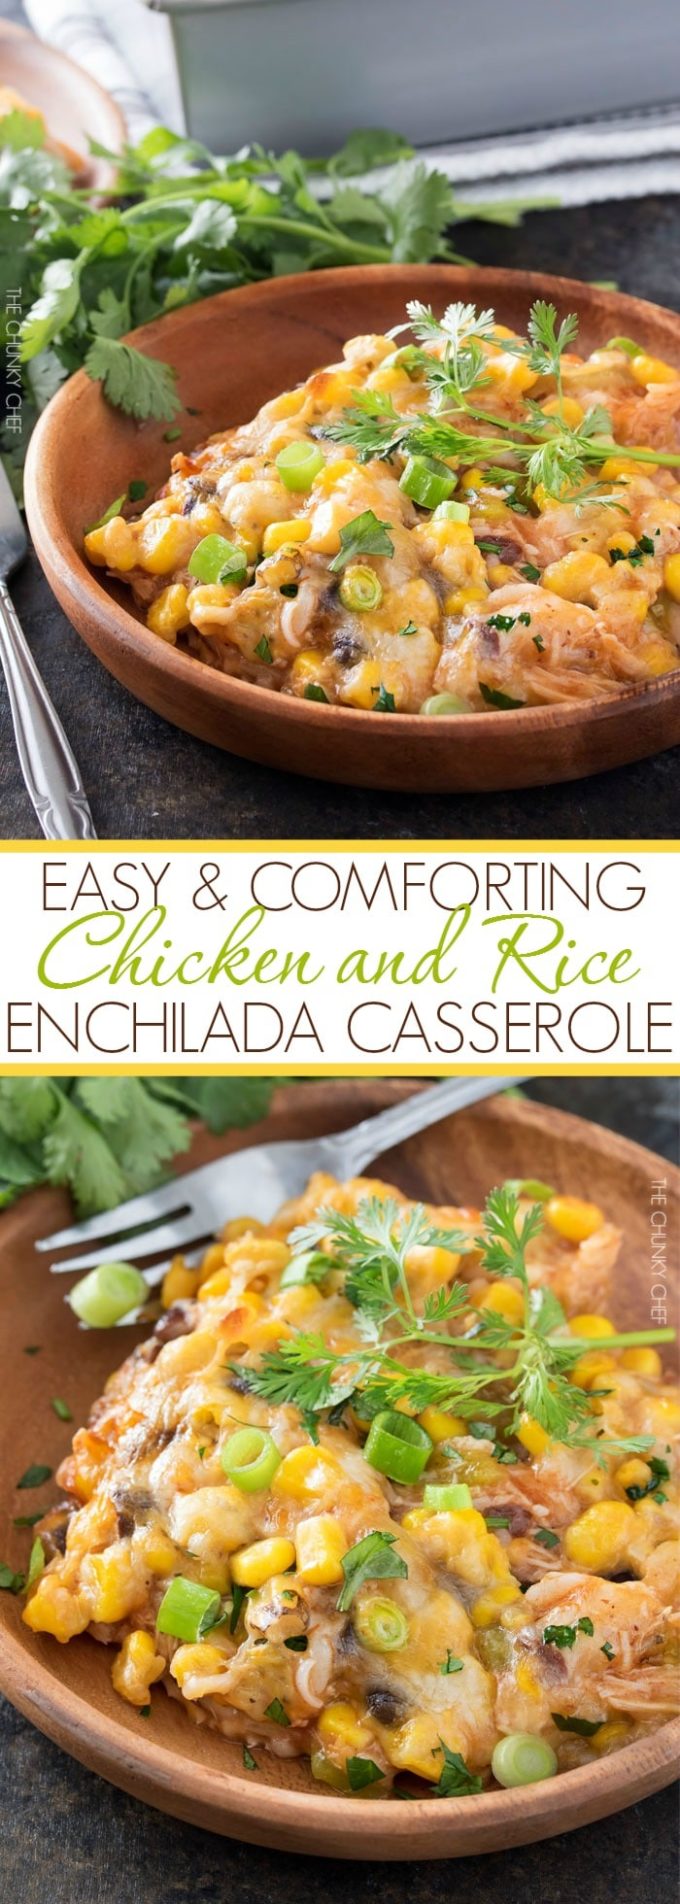 Chicken and Rice Enchilada Casserole - The Chunky Chef